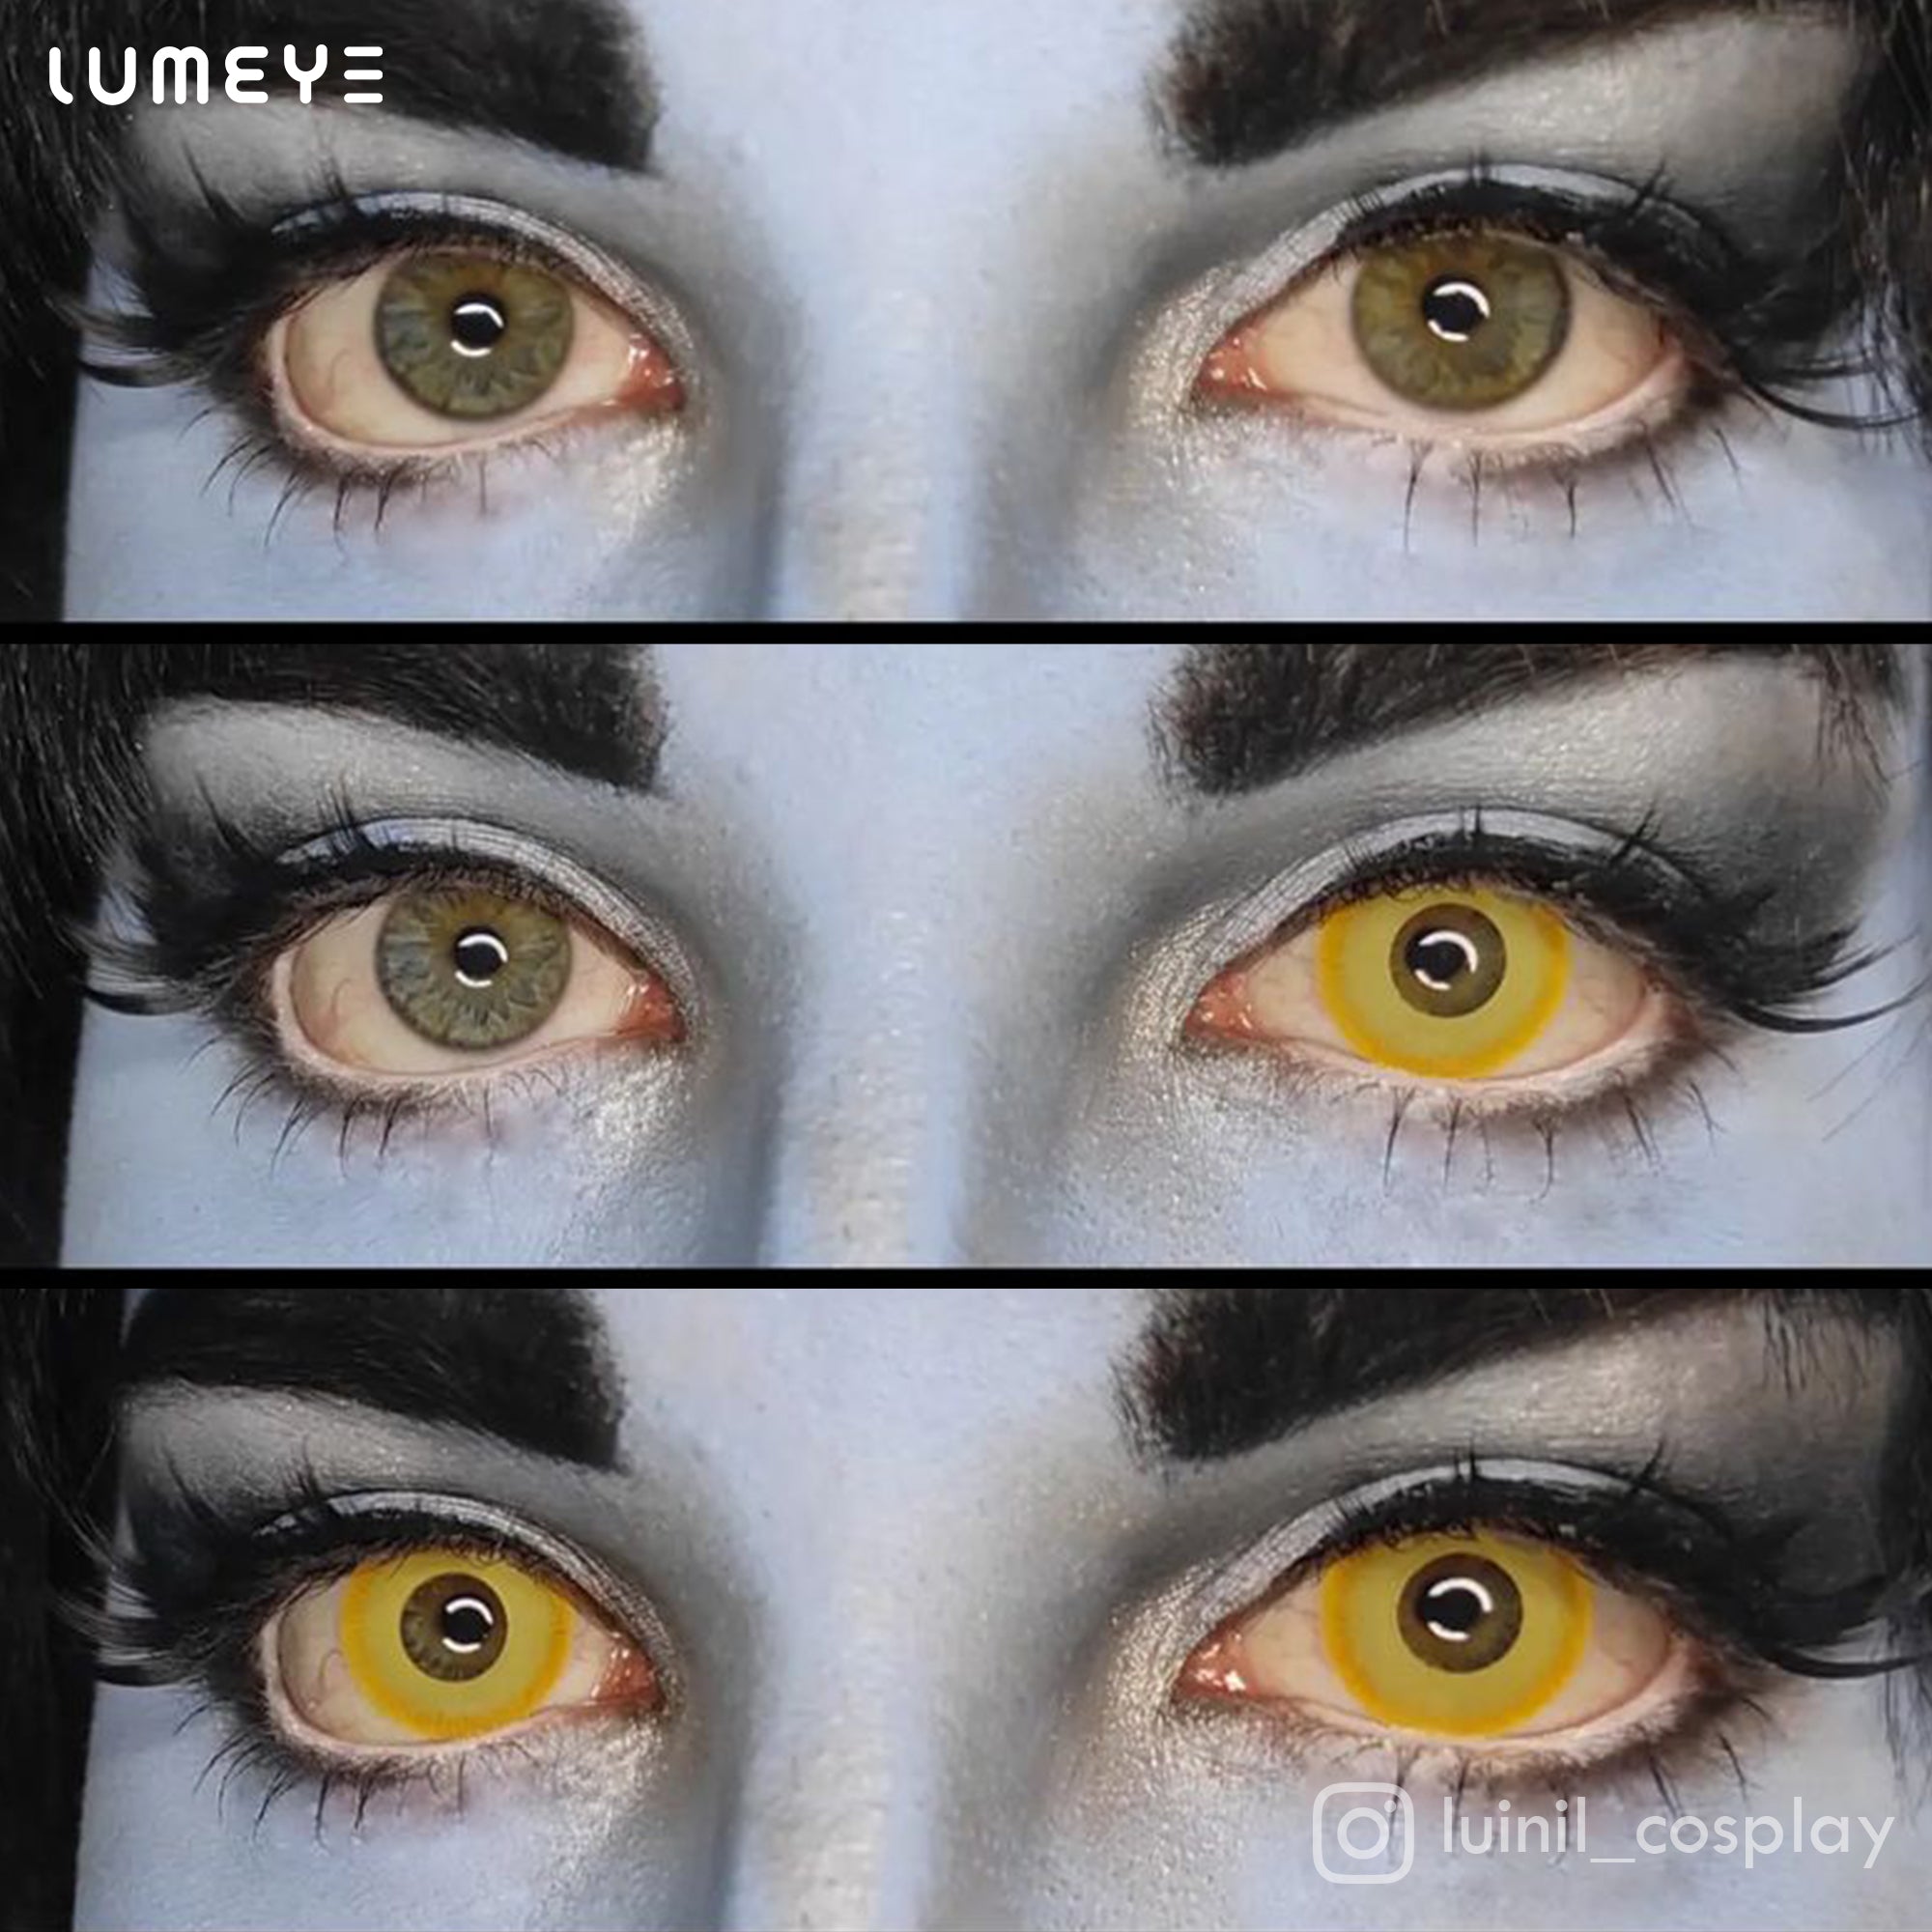 Best COLORED CONTACTS - LUMEYE Soul Reaping Yellow Colored Contact Lenses - LUMEYE